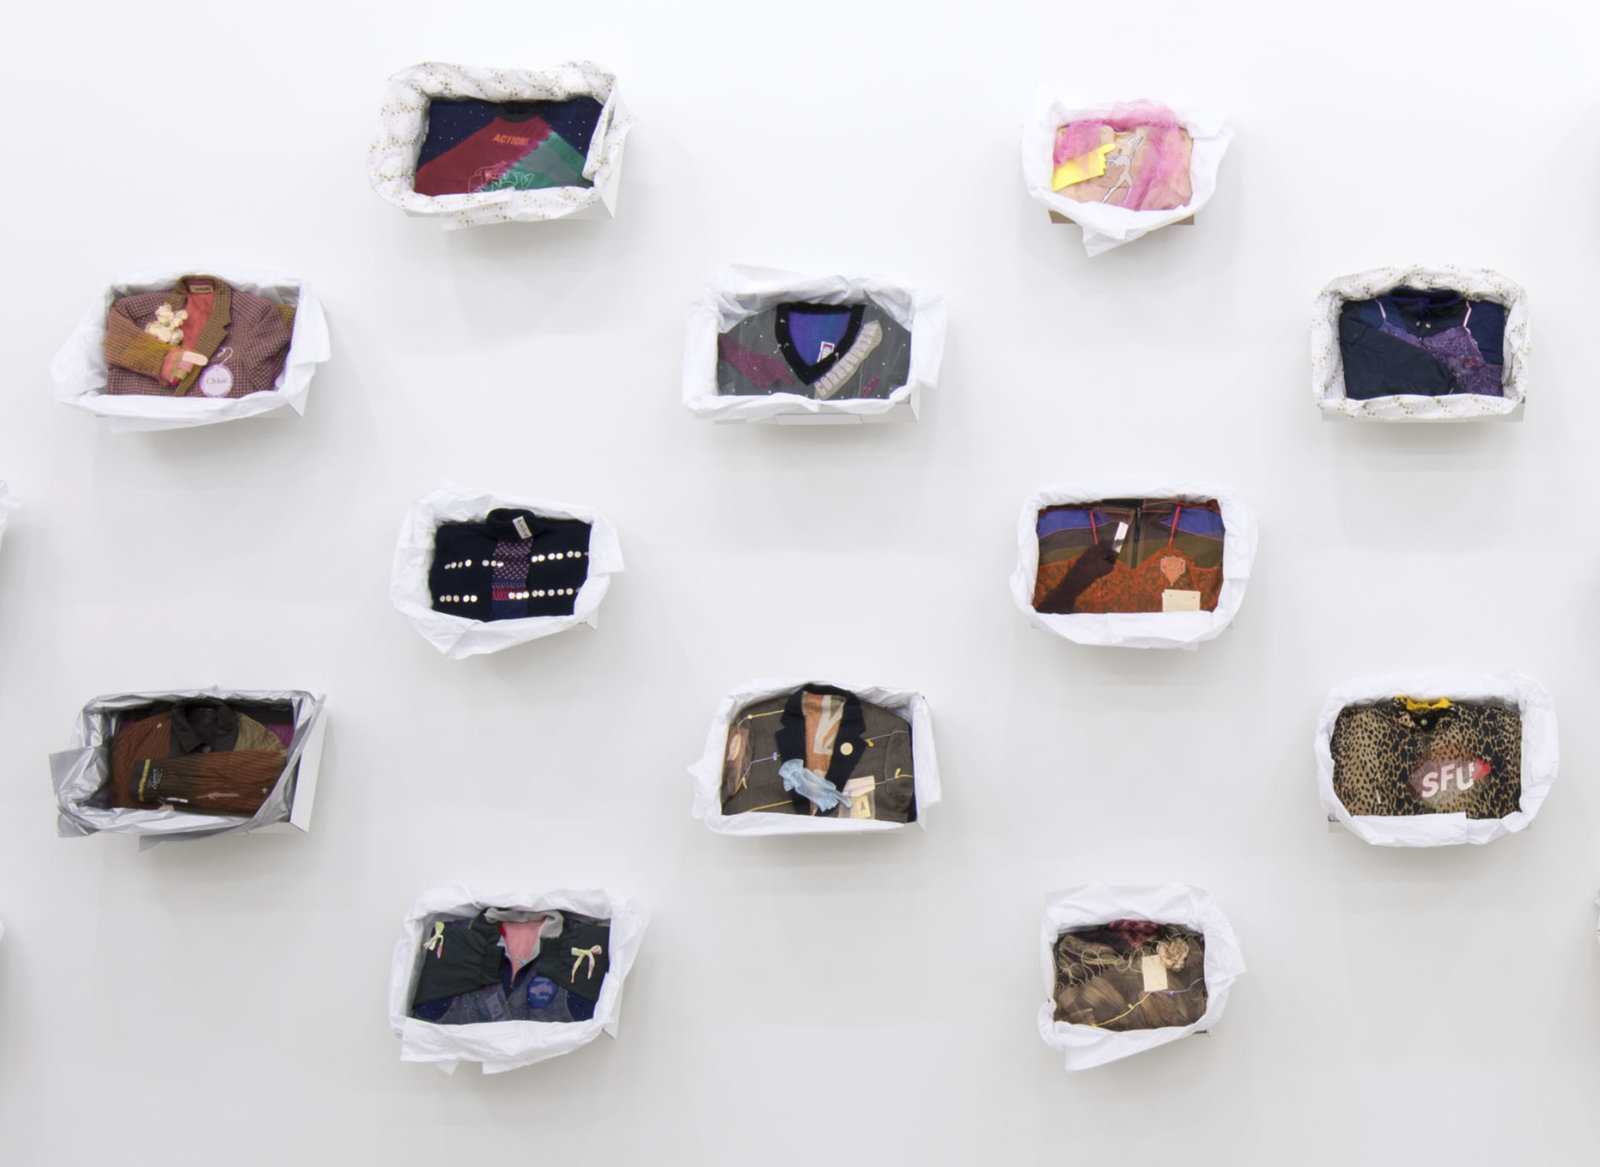 Liz Magor, Being This (detail), 2012, 36 boxes, paper, textiles, found materials, each box approximately 12 x 19 x 3 in. (31 x 48 x 6 cm), installation dimensions variable